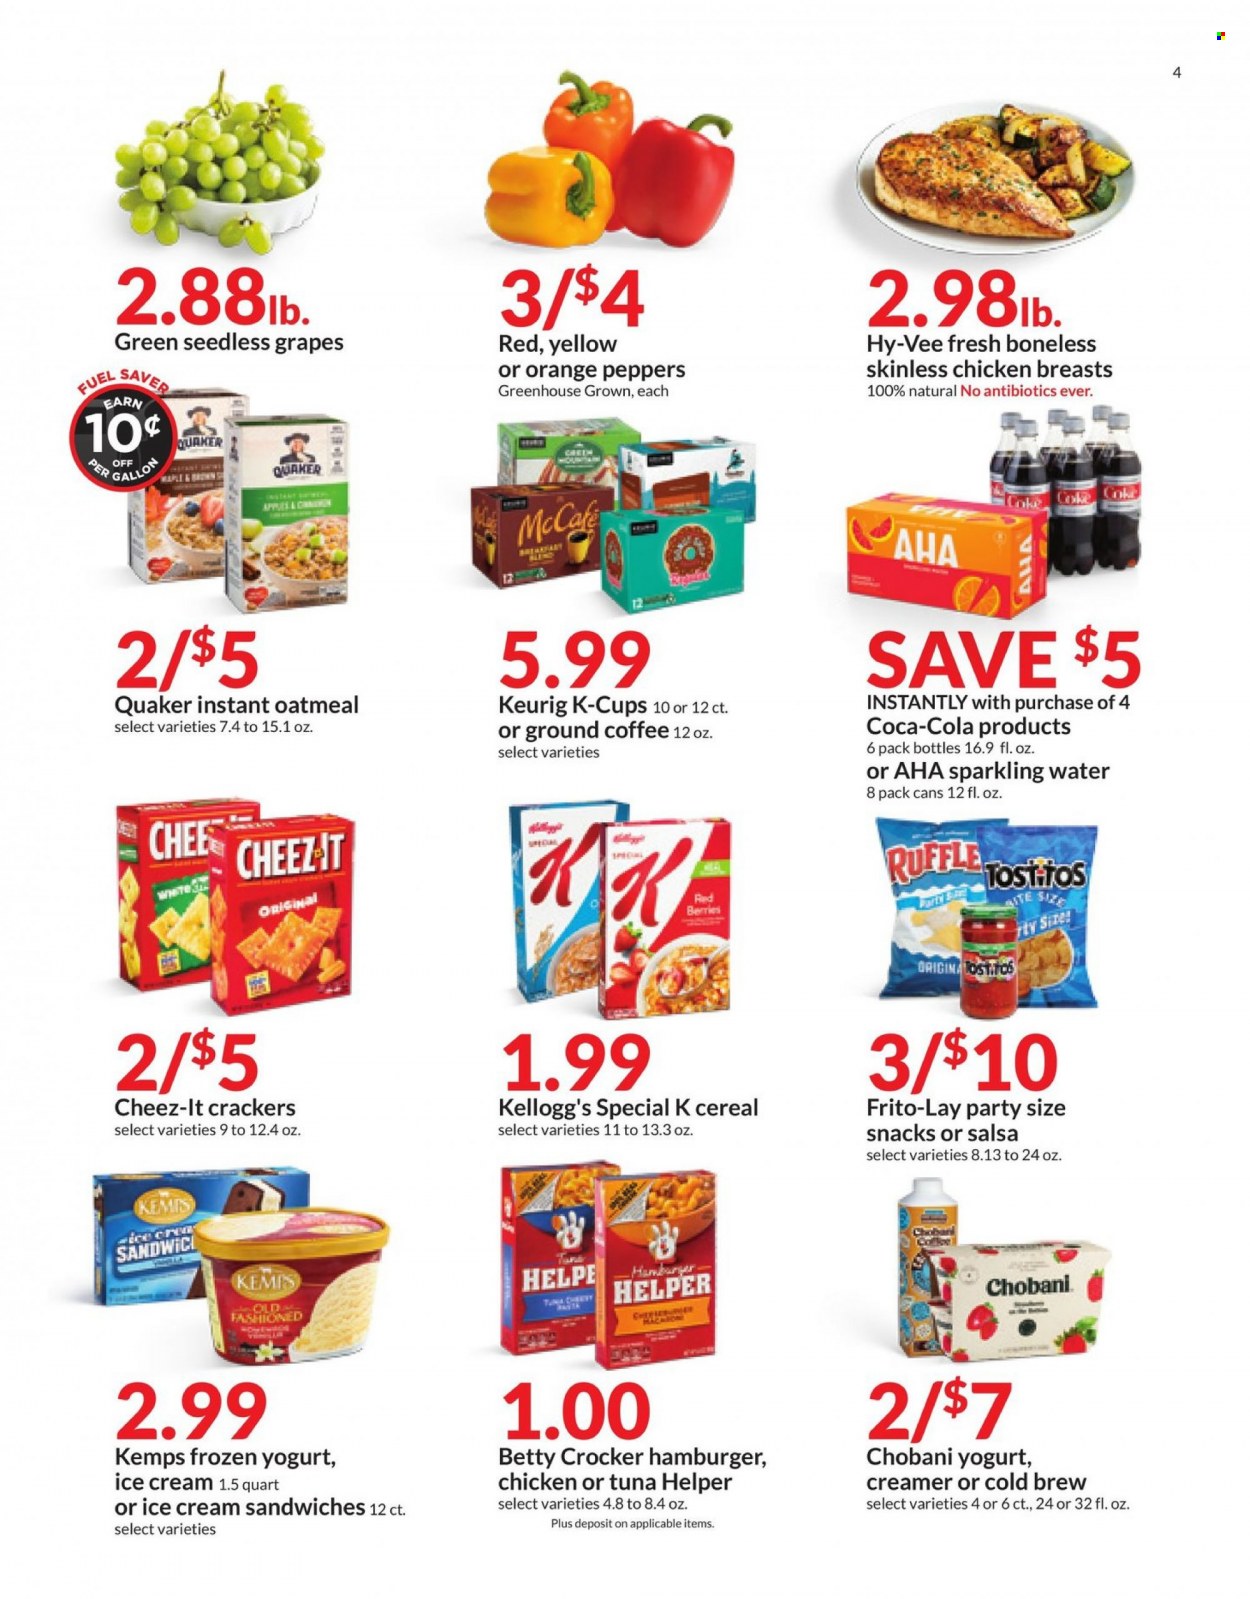 thumbnail - Hy-Vee Flyer - 01/12/2022 - 01/18/2022 - Sales products - seedless grapes, peppers, grapes, oranges, tuna, hamburger, Quaker, Kemps, yoghurt, Chobani, creamer, ice cream, ice cream sandwich, snack, crackers, Kellogg's, Frito-Lay, Cheez-It, oatmeal, cereals, salsa, Coca-Cola, sparkling water, coffee, ground coffee, coffee capsules, McCafe, K-Cups, Keurig, chicken breasts. Page 4.